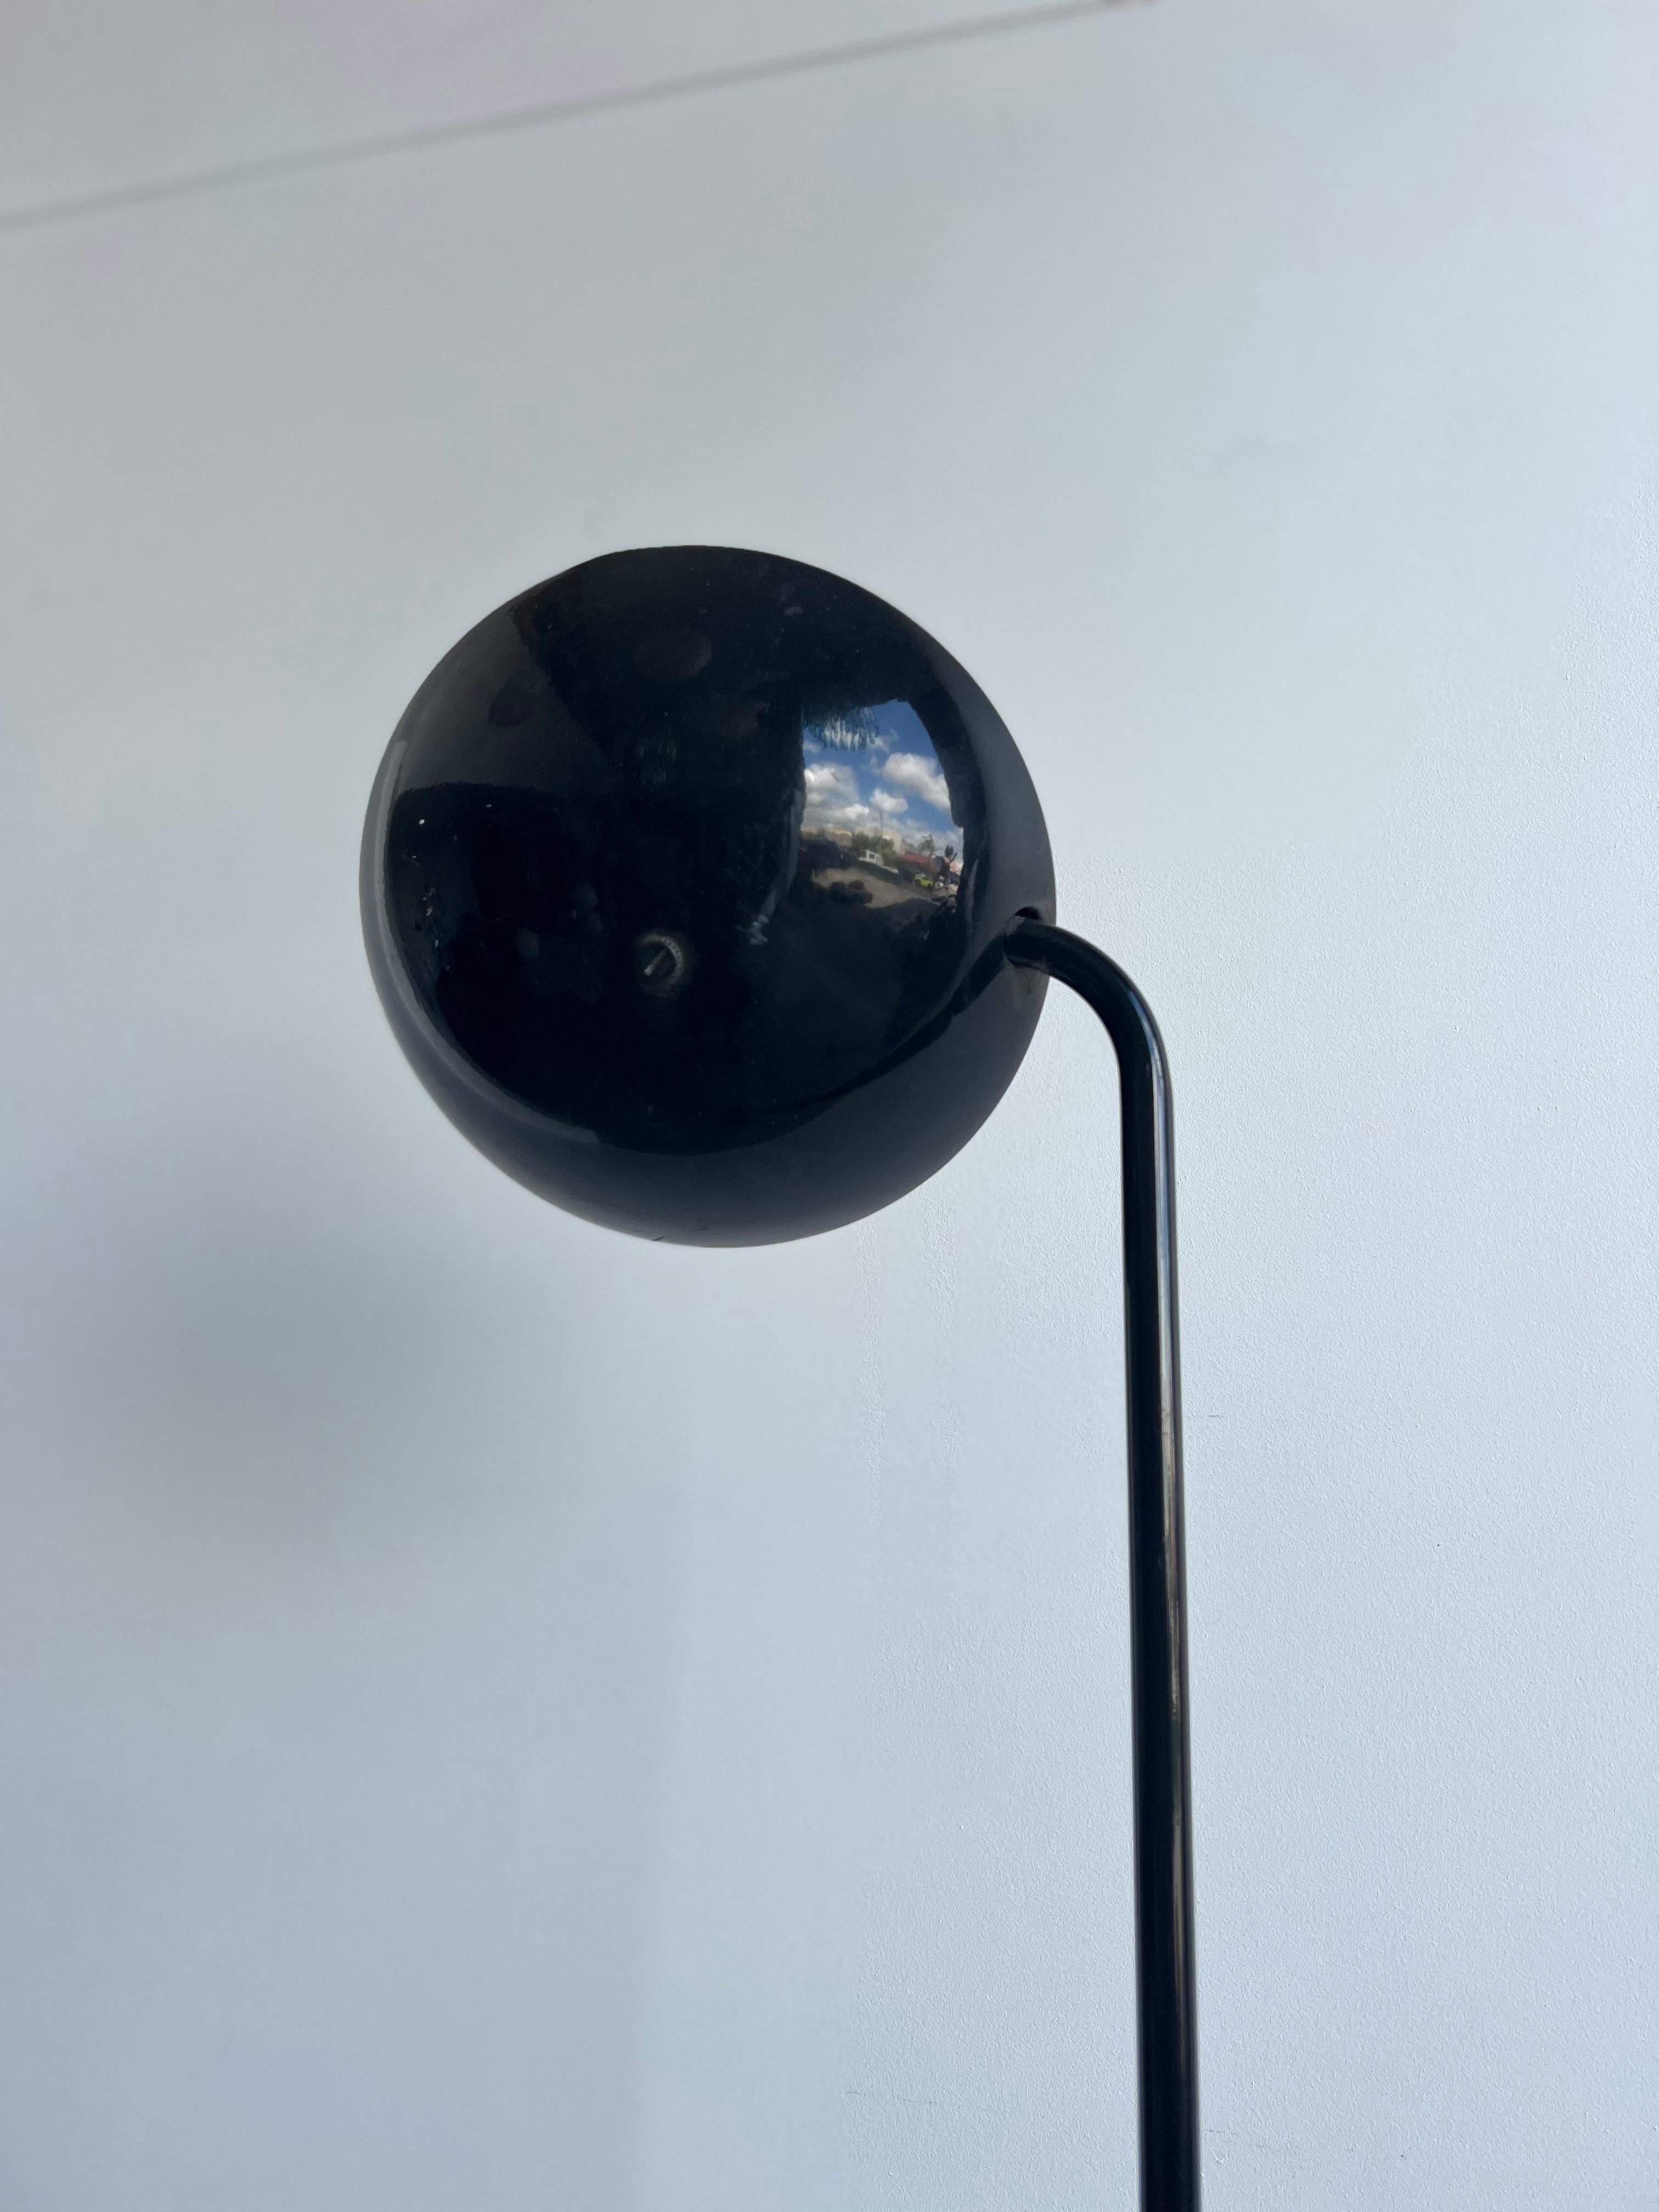 Italian Tre Ci Luci floor lamp Mod. 3563 by P. Marucco 1970s.
Minimal floor lamp in black lacquered metal really nice light effect and not too invasive Halogen light.